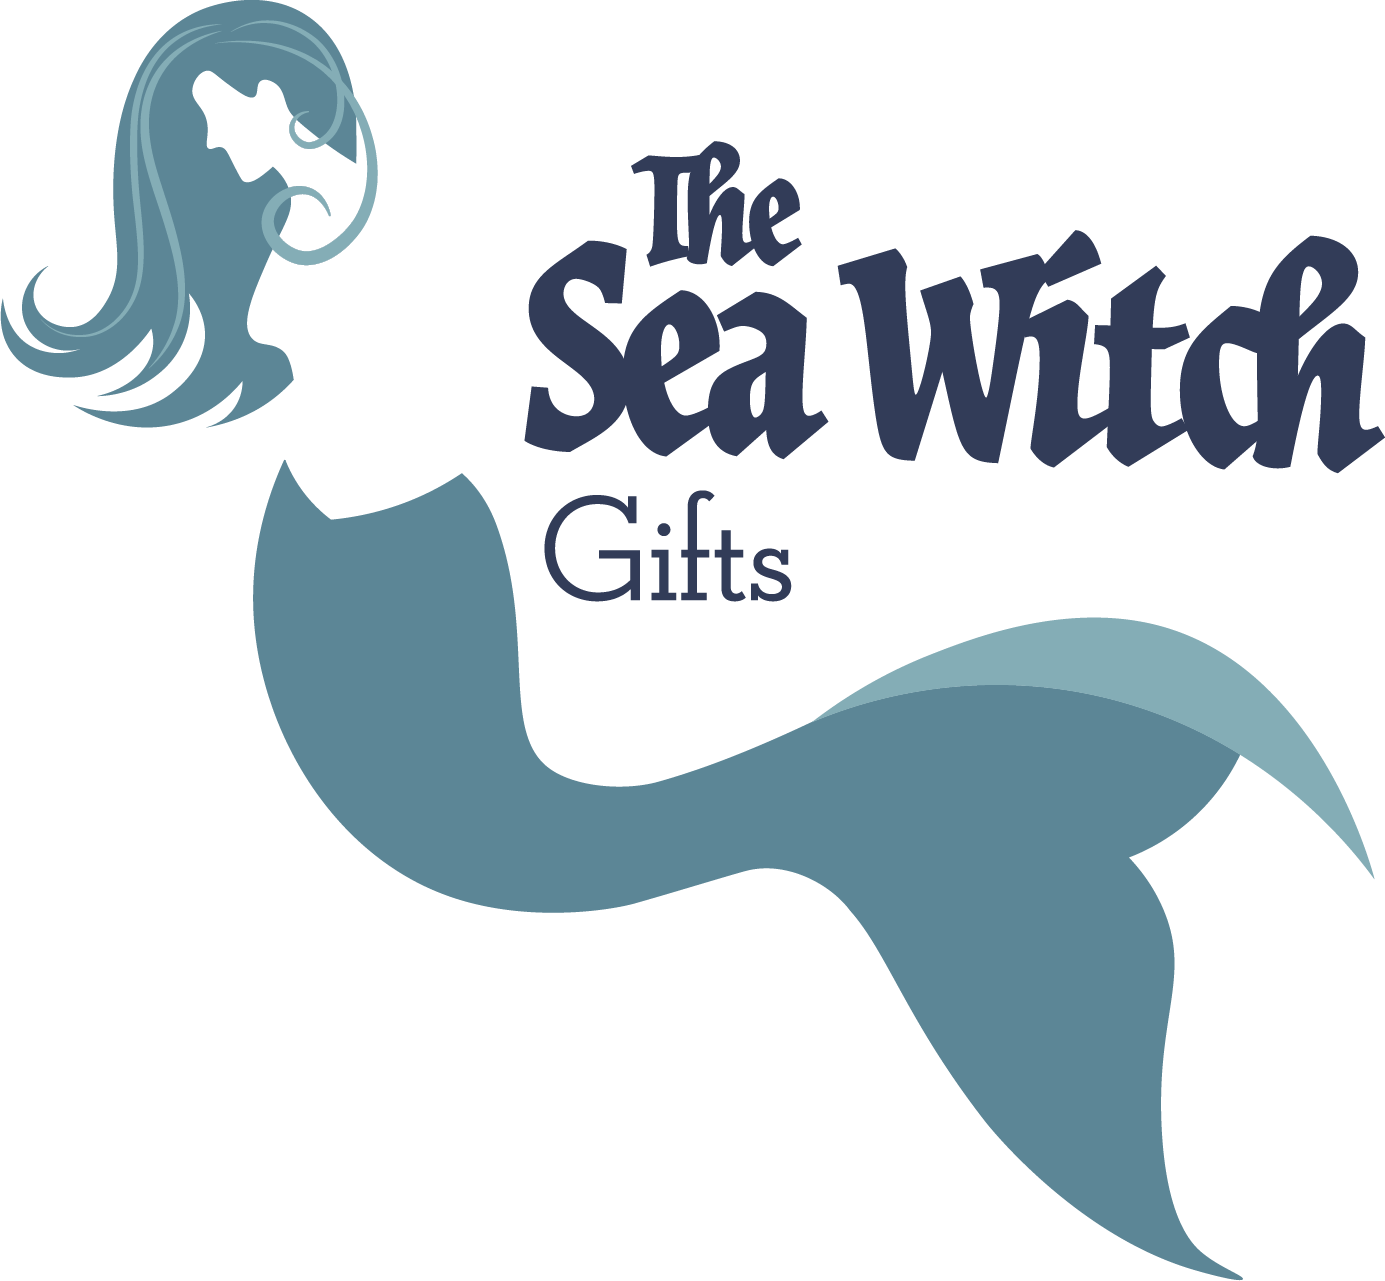 The Sea Witch Gifts